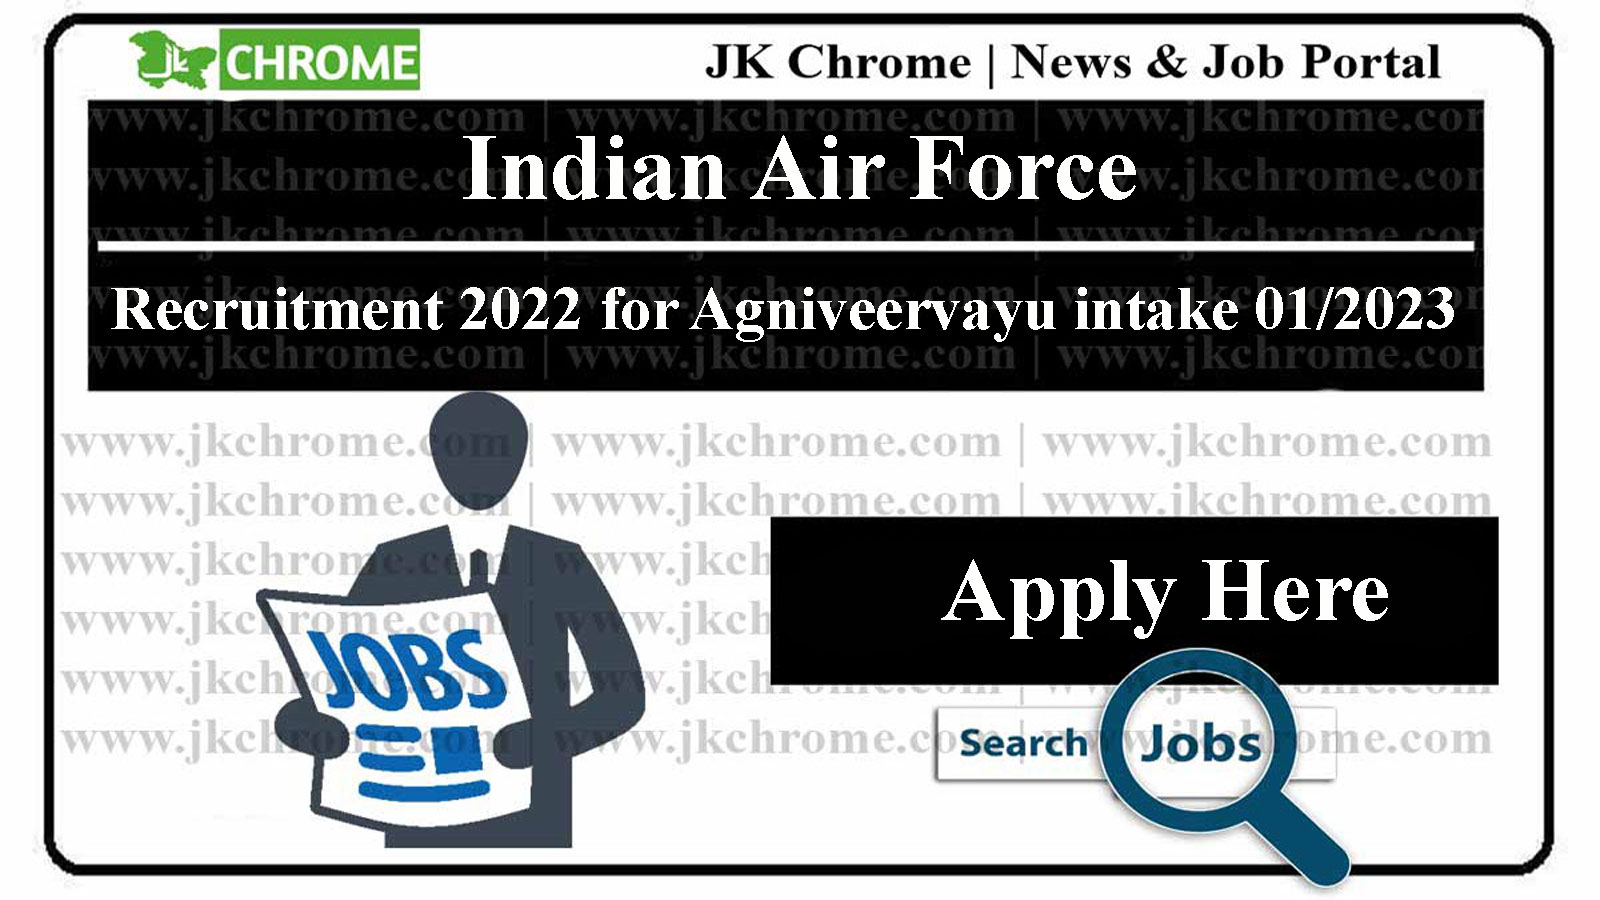 Indian Air Force Recruitment 2022, Apply Online for Agniveervayu intake 01/2023